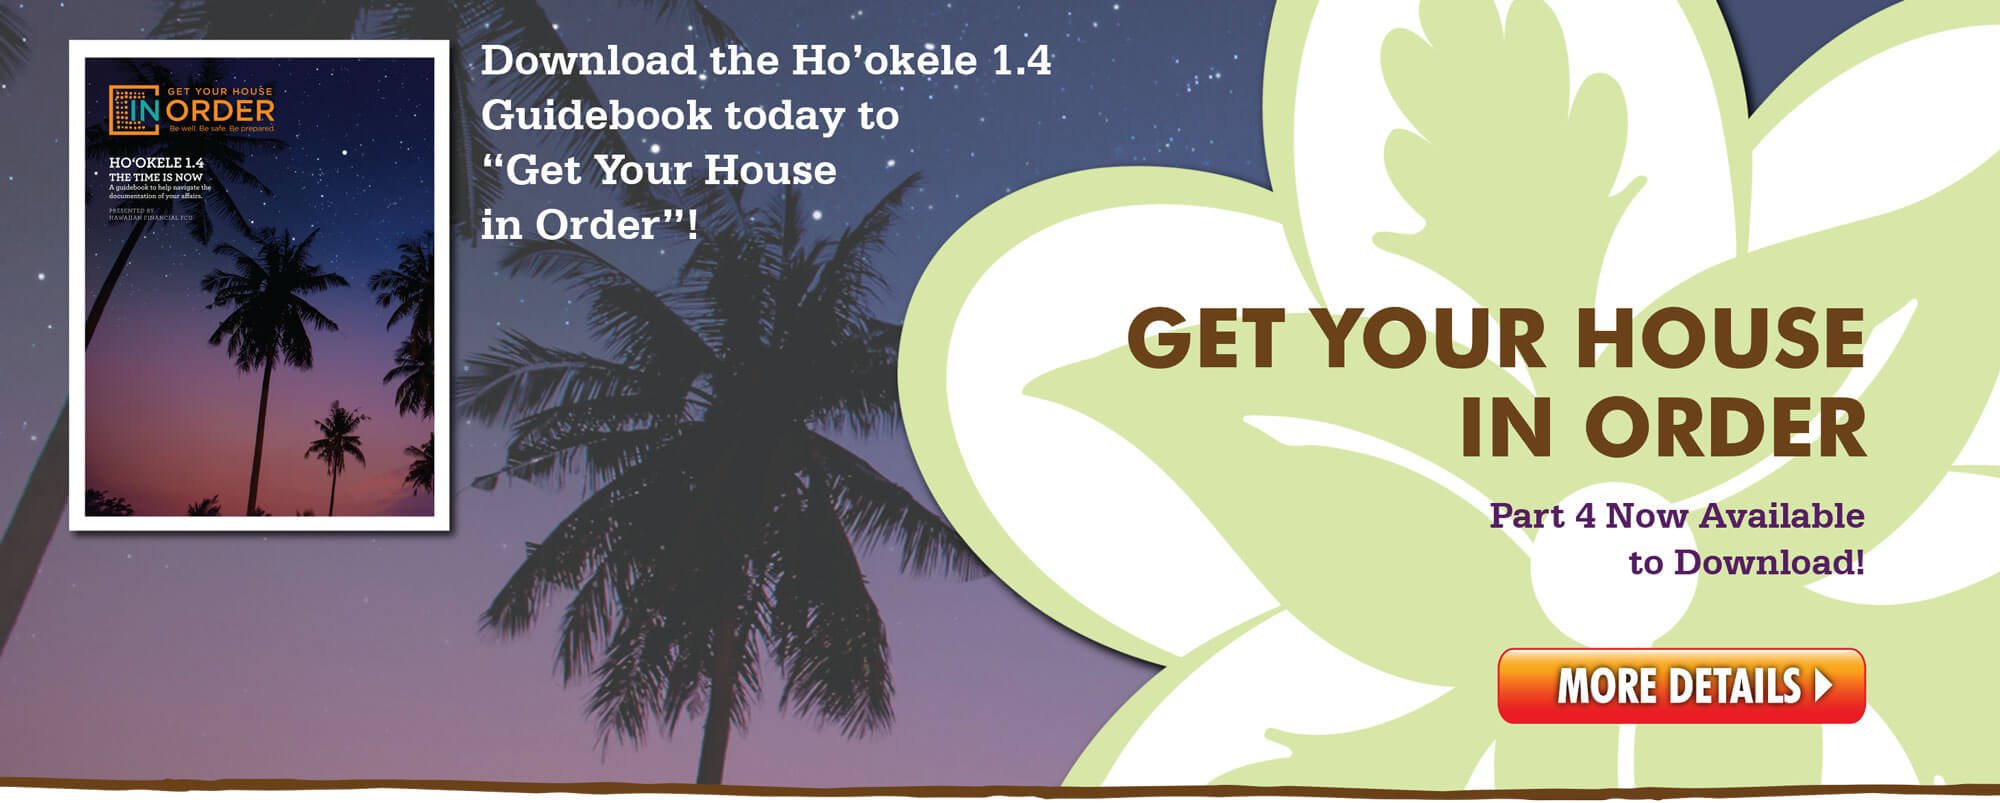 Download the Ho'okele 1.4 Guidebook today to 